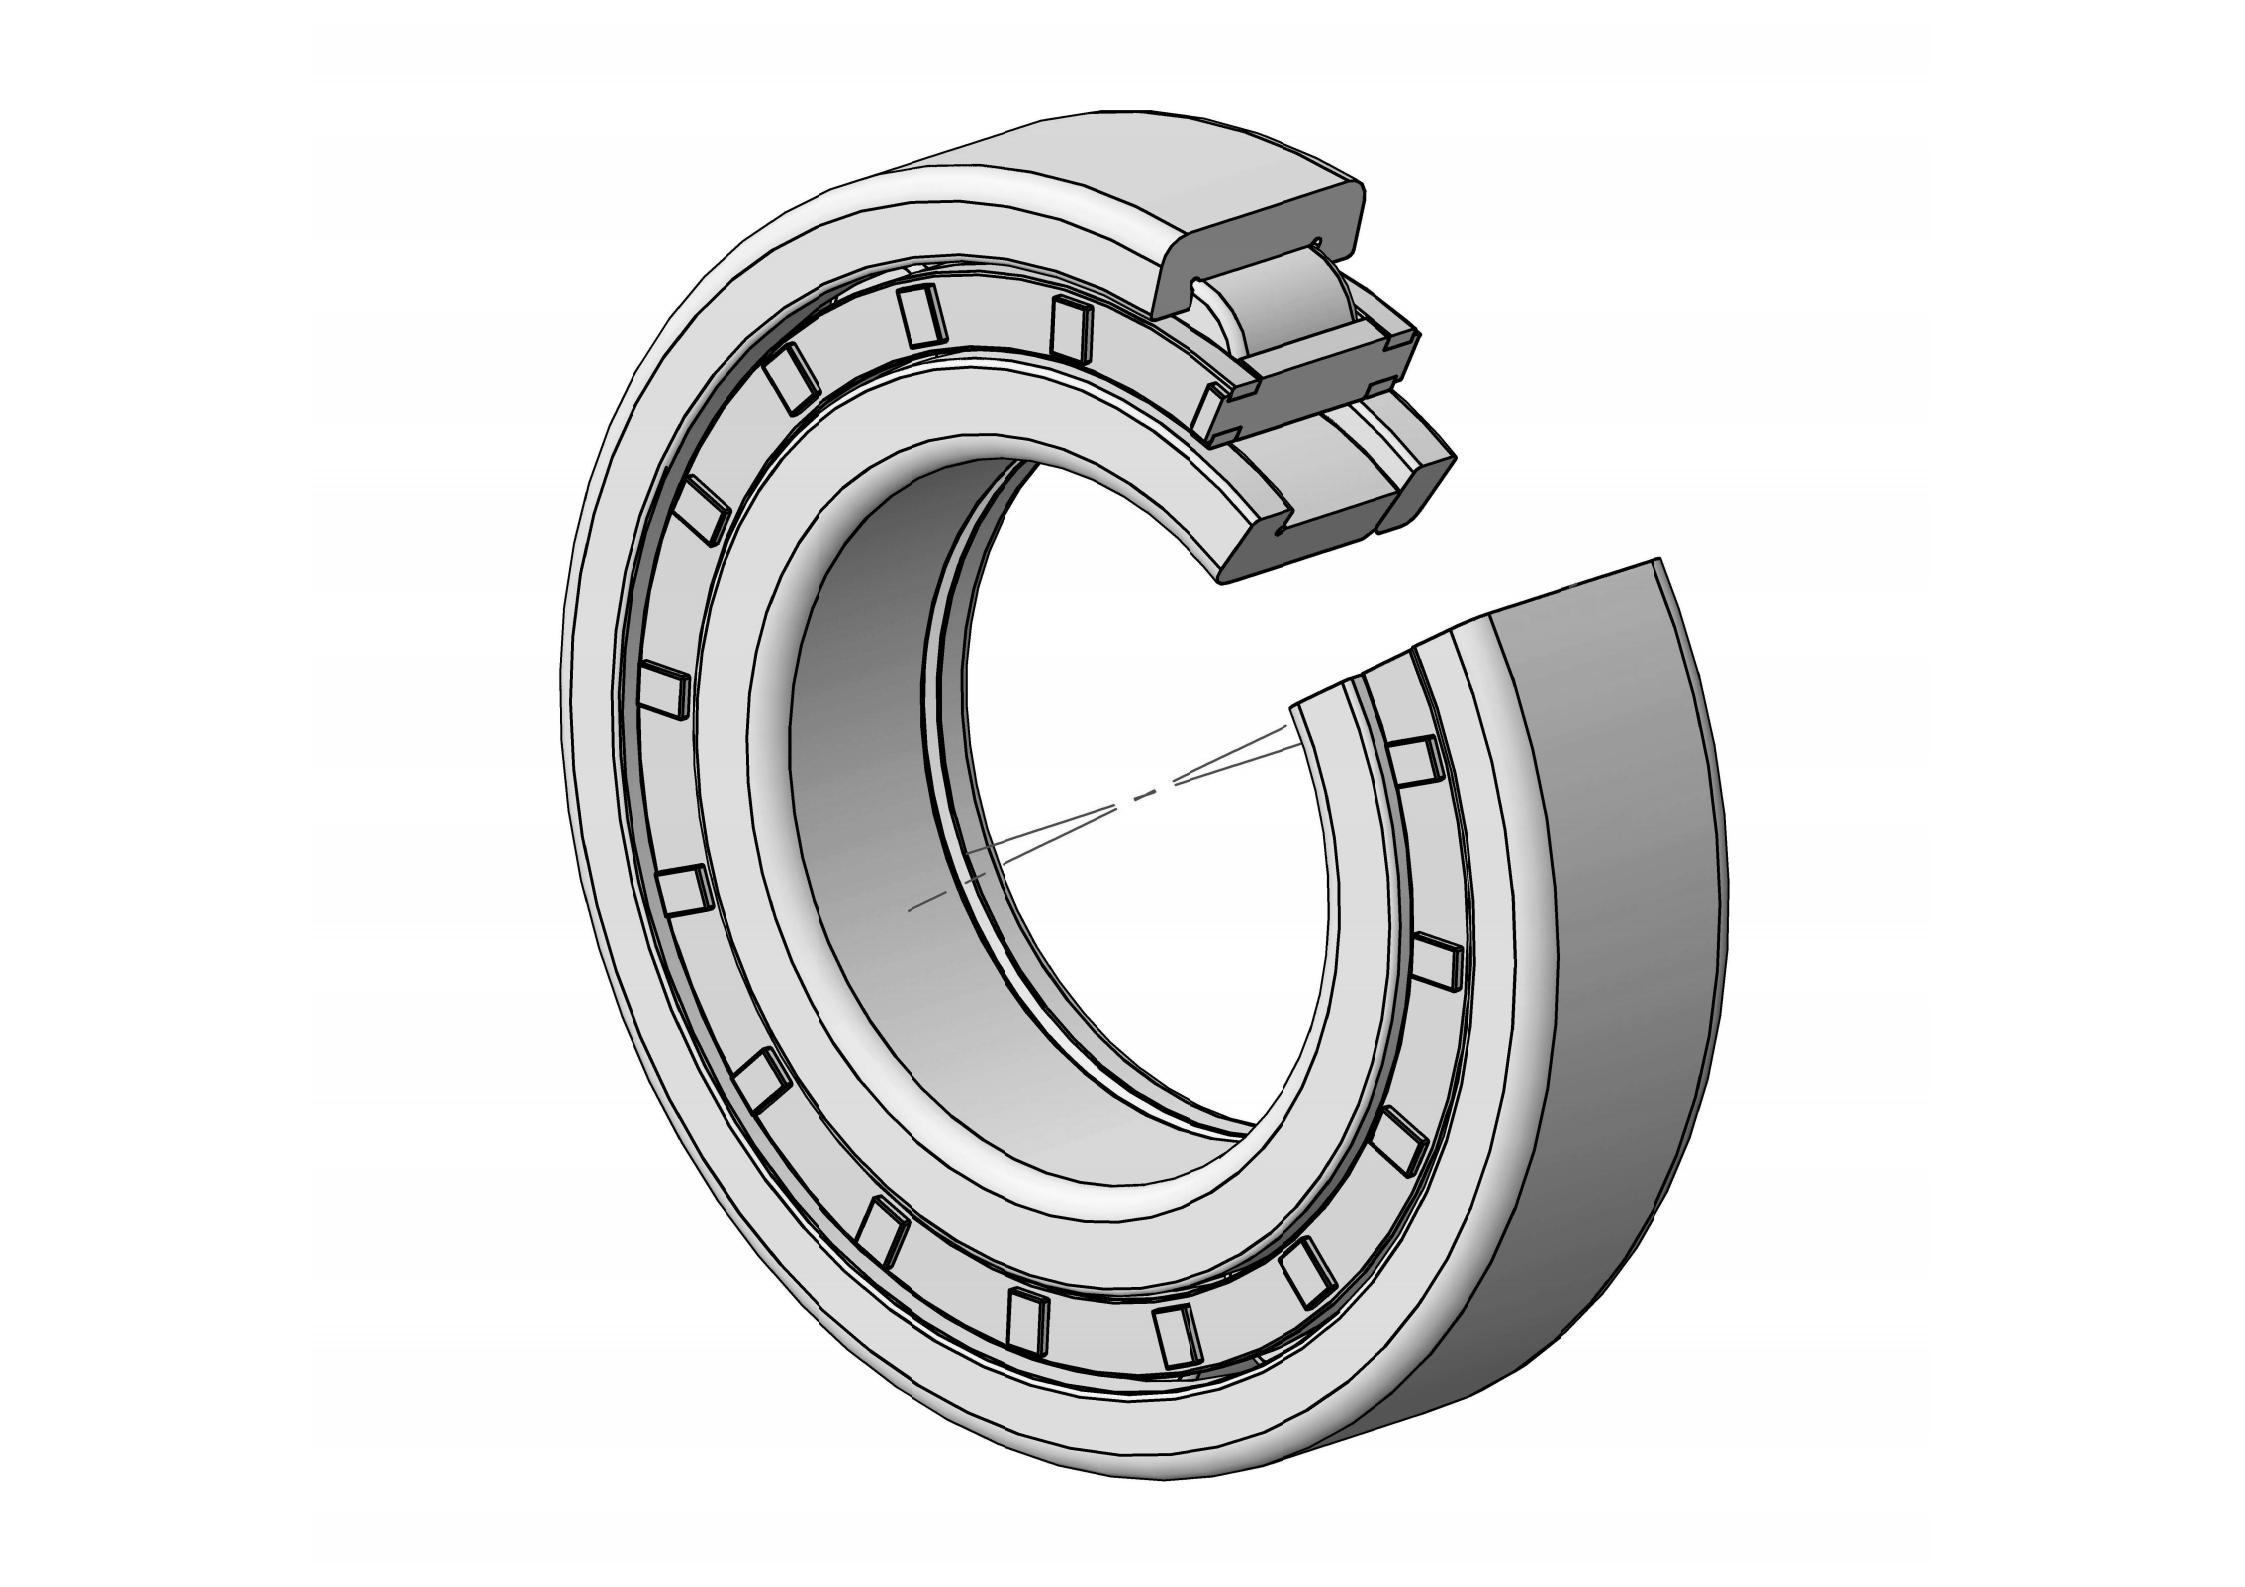 NUP304-E Single Row Cylindrical roller bearing 